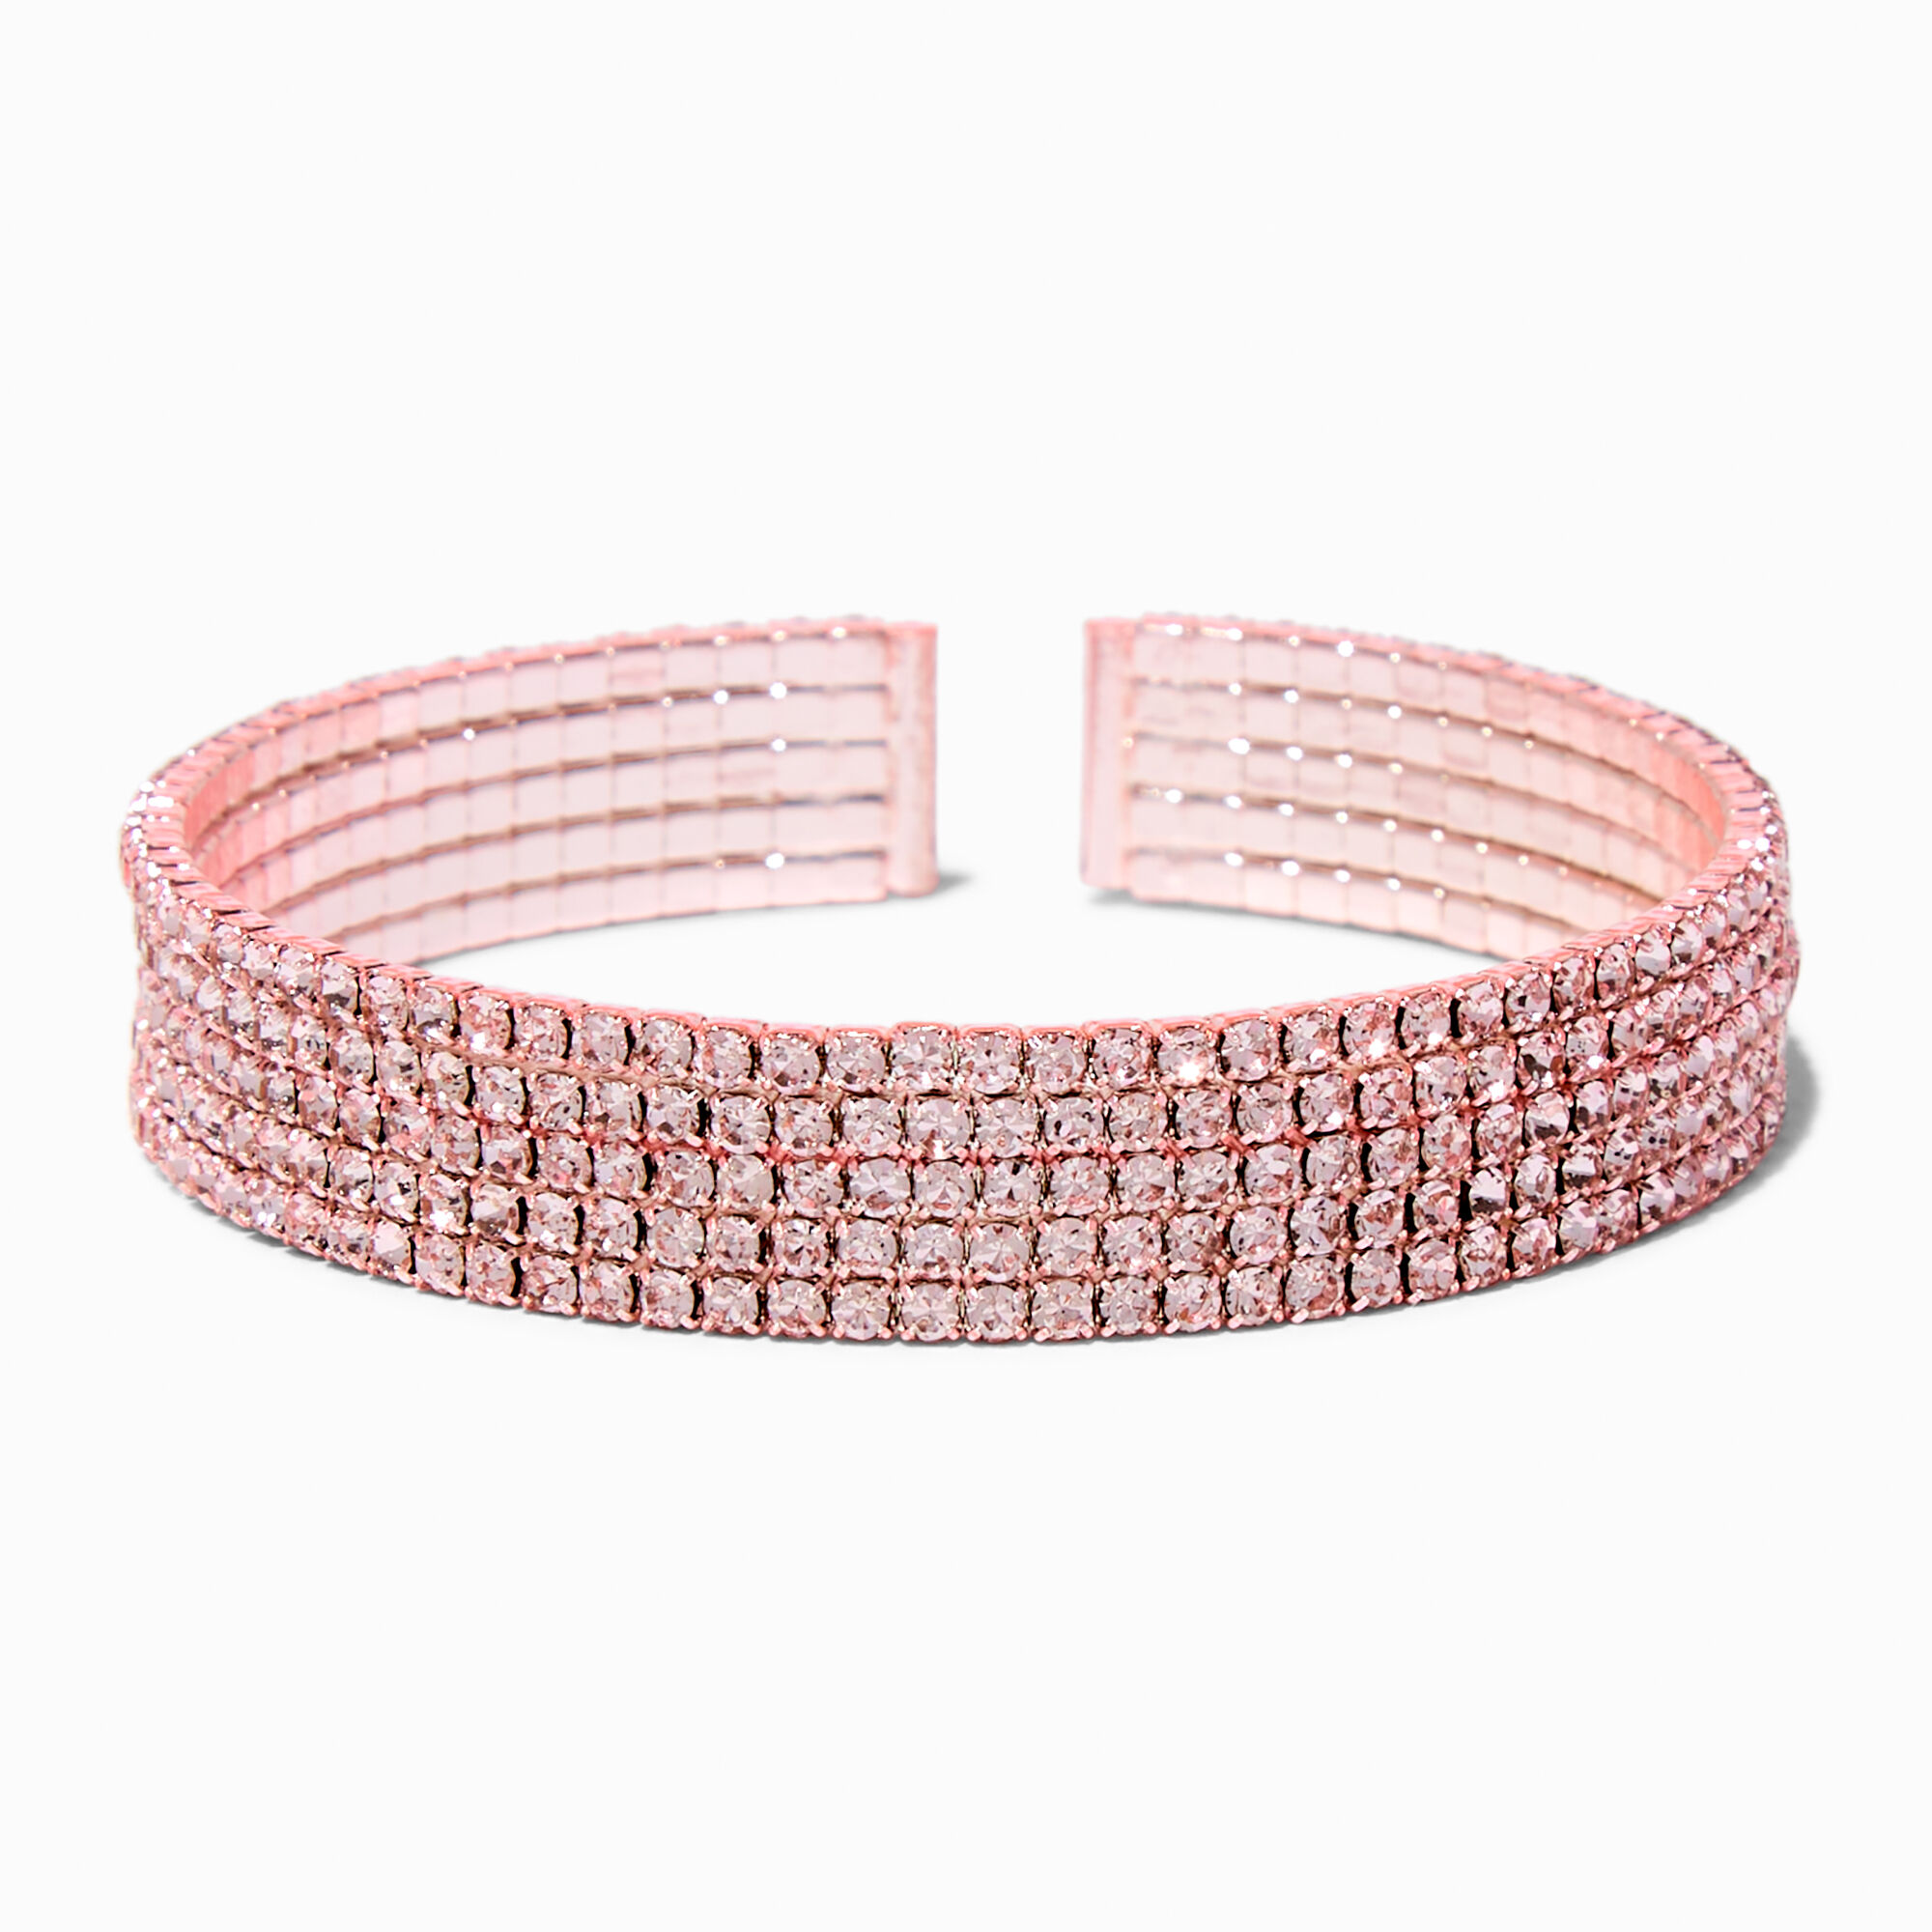 View Claires Crystal FiveRow Cuff Bracelet Pink information